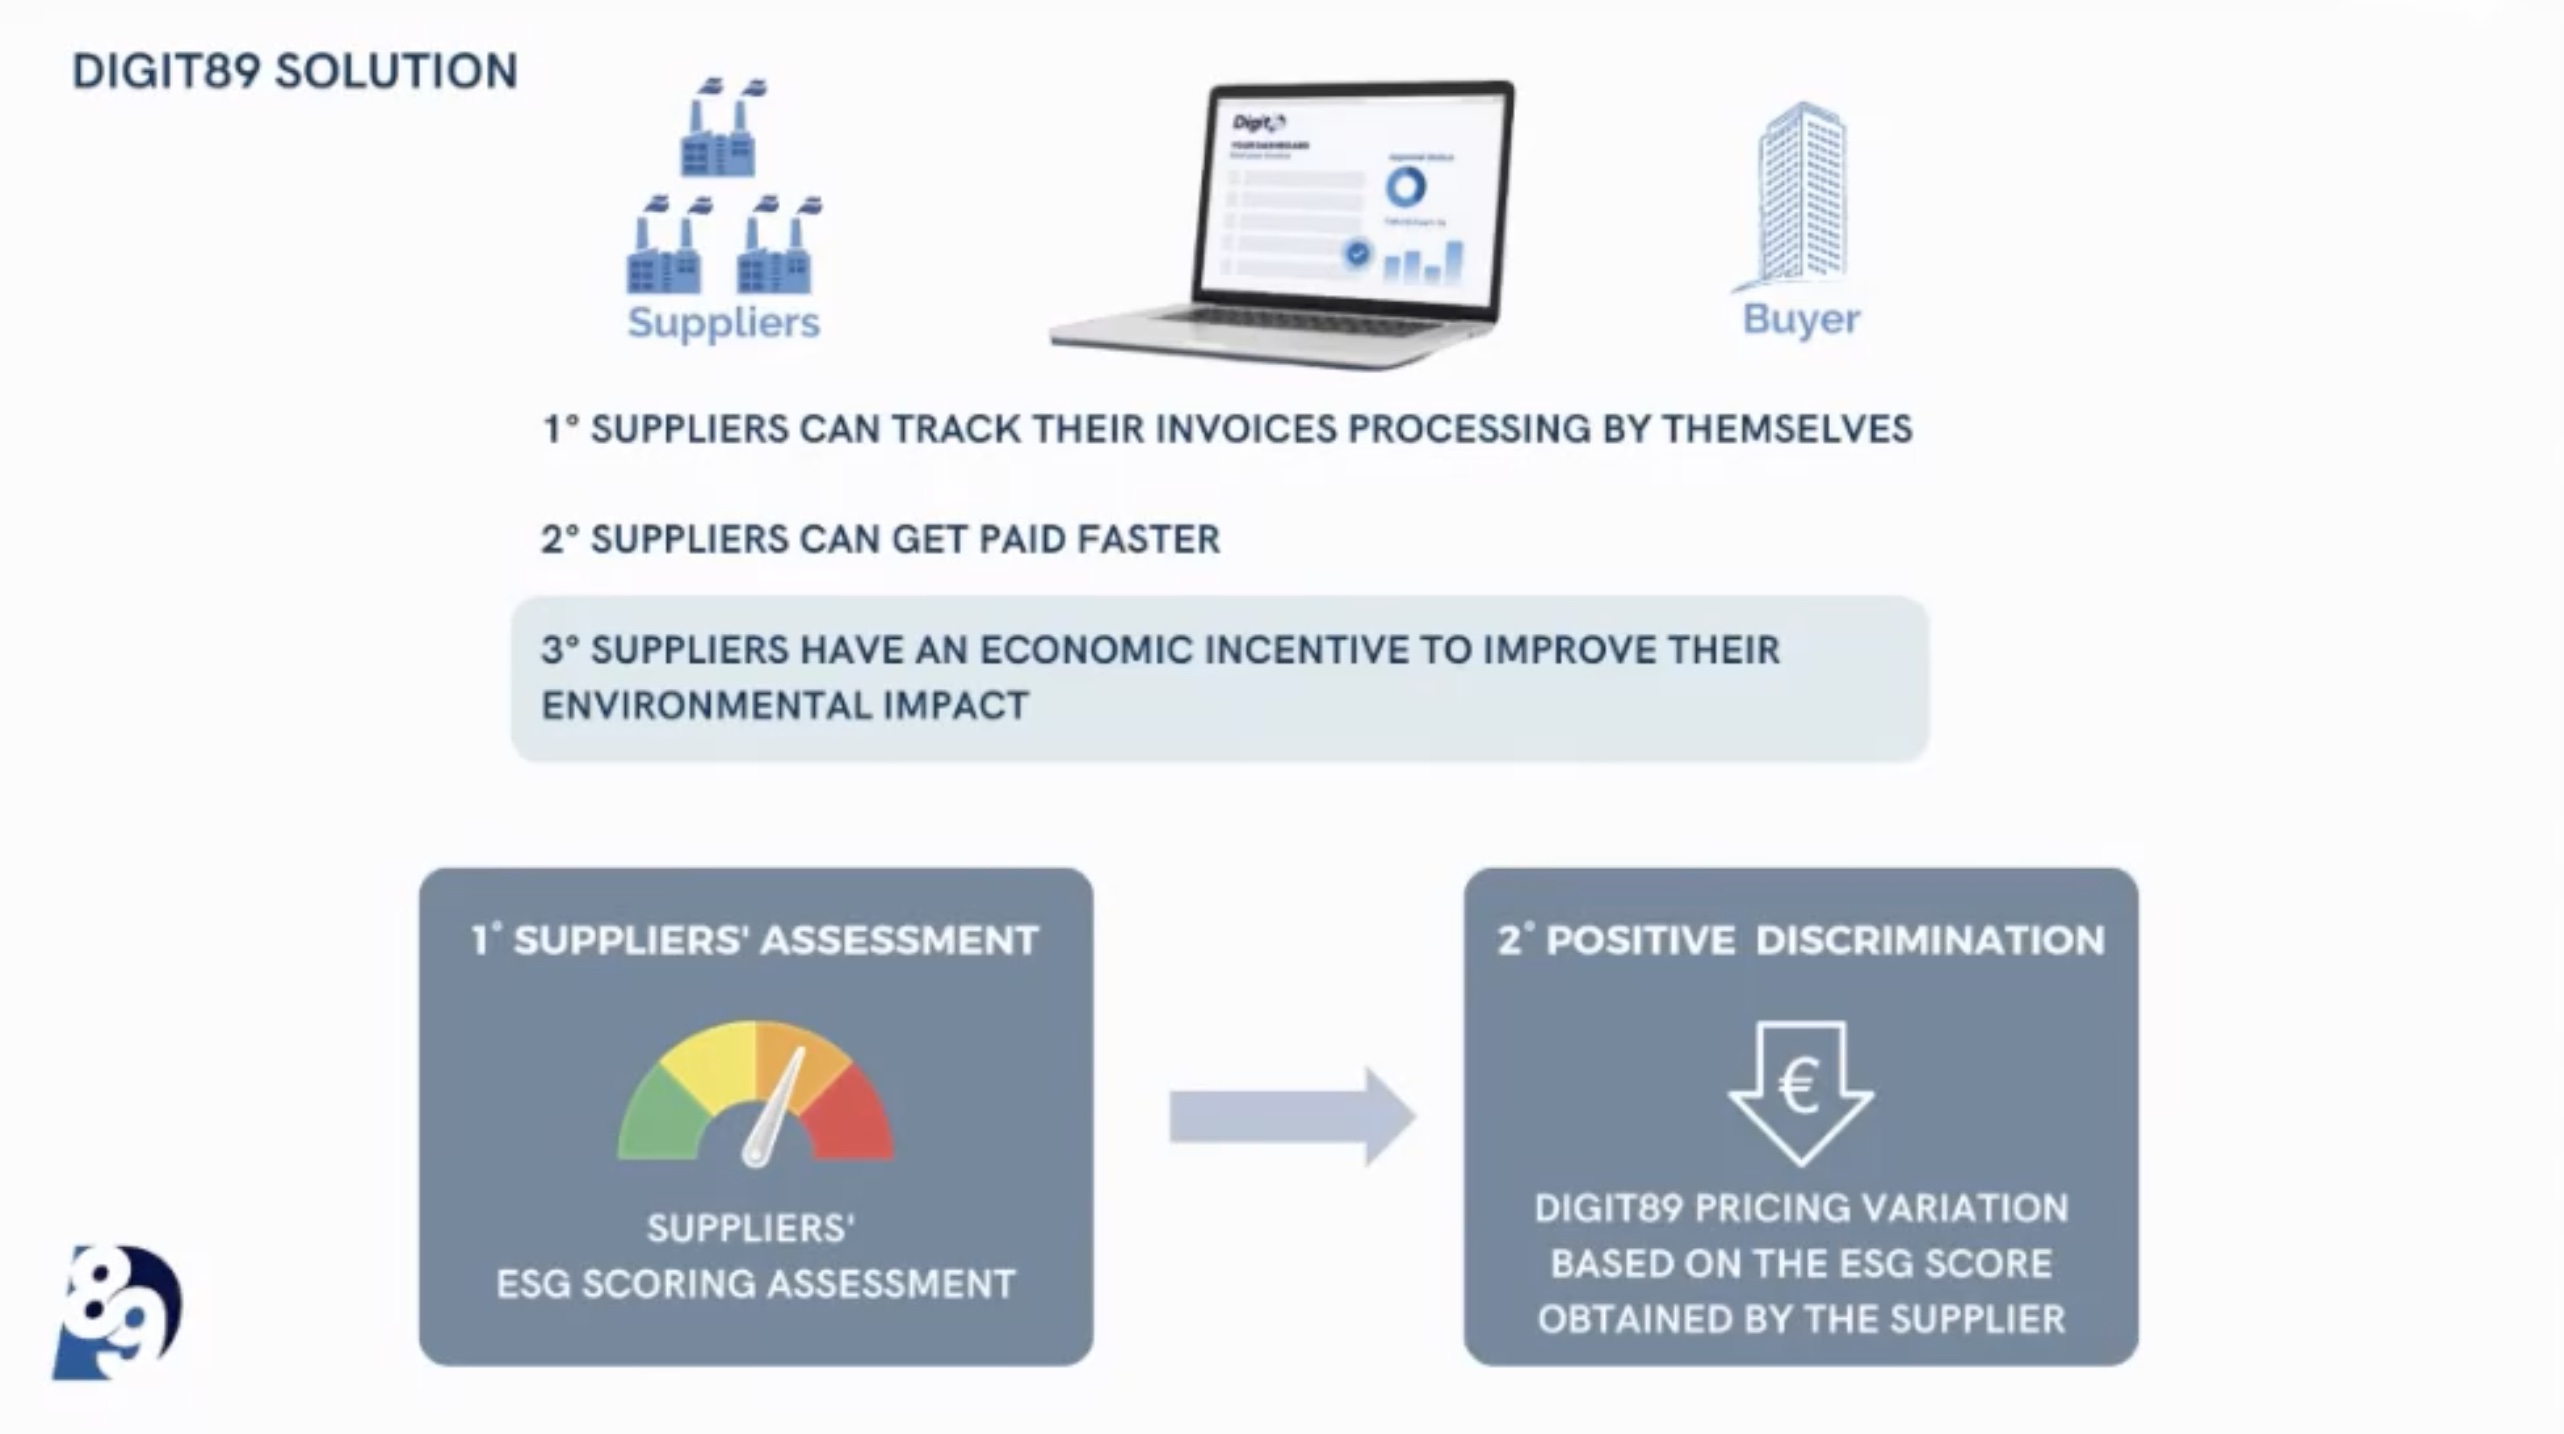 Diagram about Digit89 Solution. 
From Suplliers' assessment to positive discrimination. 
1. Suppliers can track their invoices process by themselves
2.Suppliers can get paid faster
3.Summpliers have an economic incentive to improve their environmental impact. 